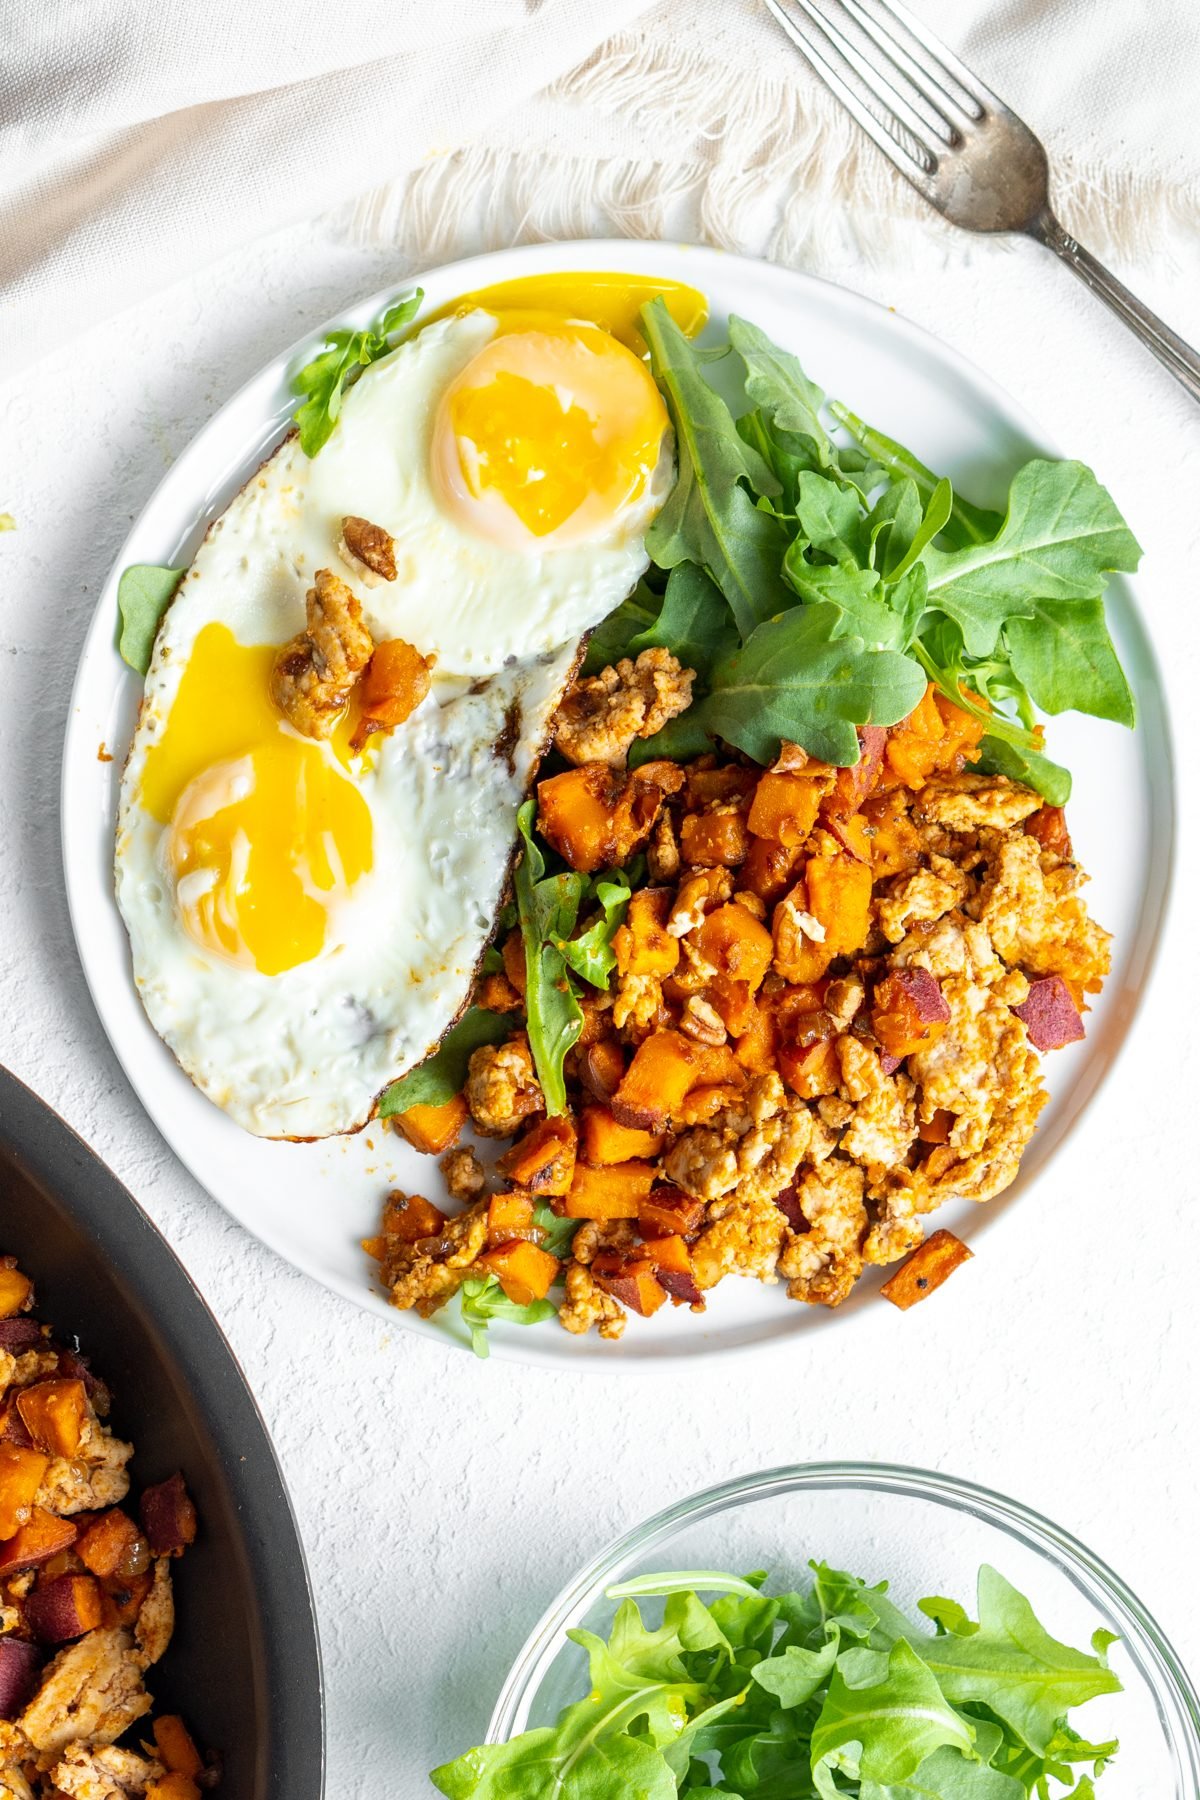 Eggs, greens, and turkey sweet potato hash on a plate.